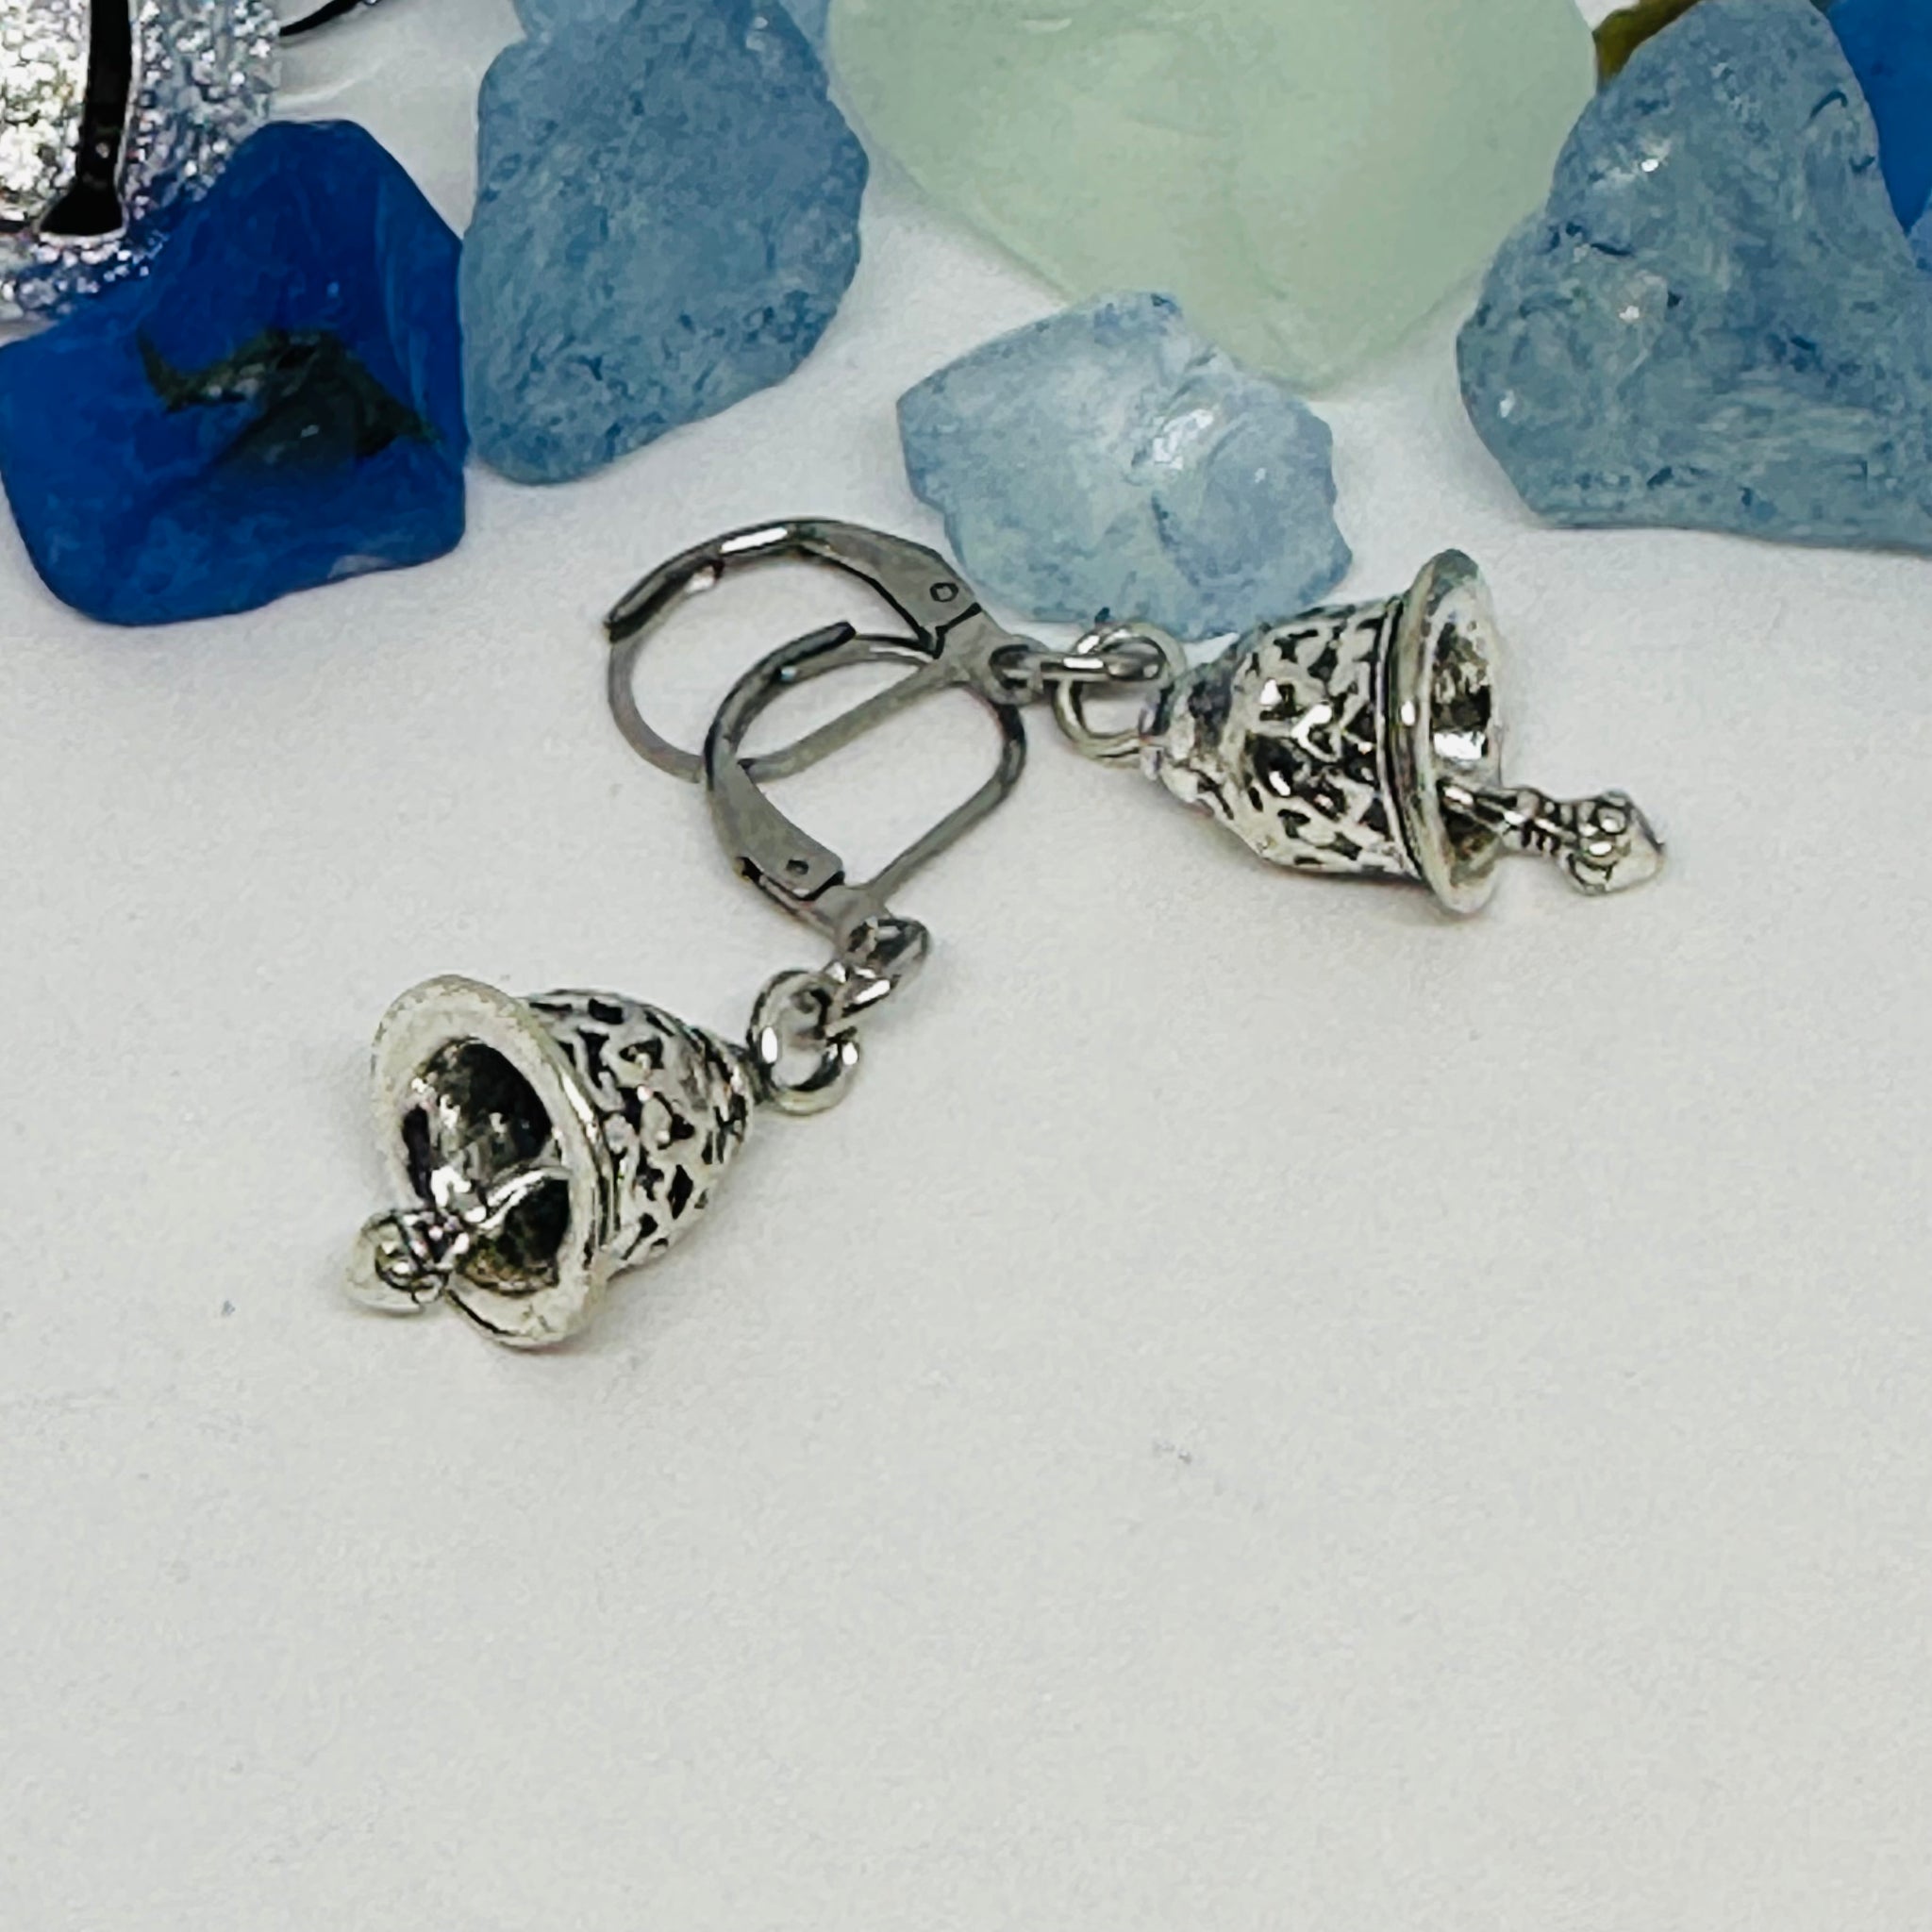 Bell Charm Earrings | Fun Costume Jewelry | Holiday Bling